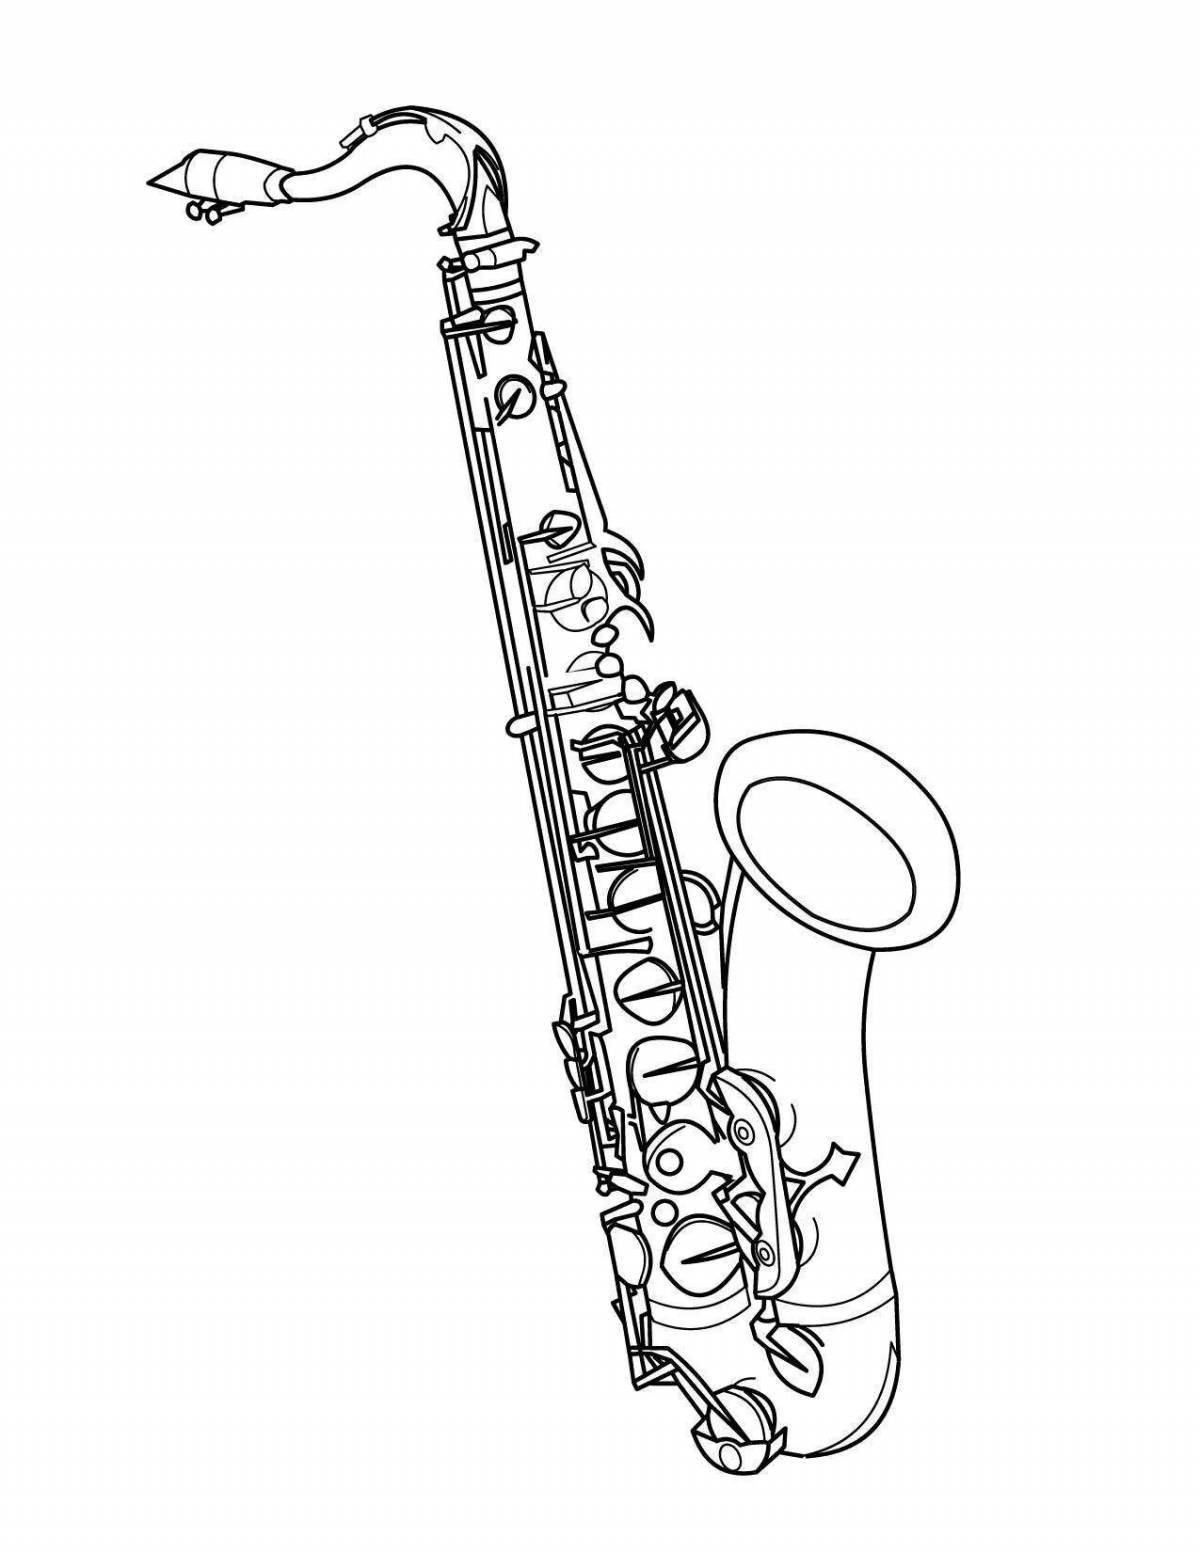 Coloring alluring wind instruments